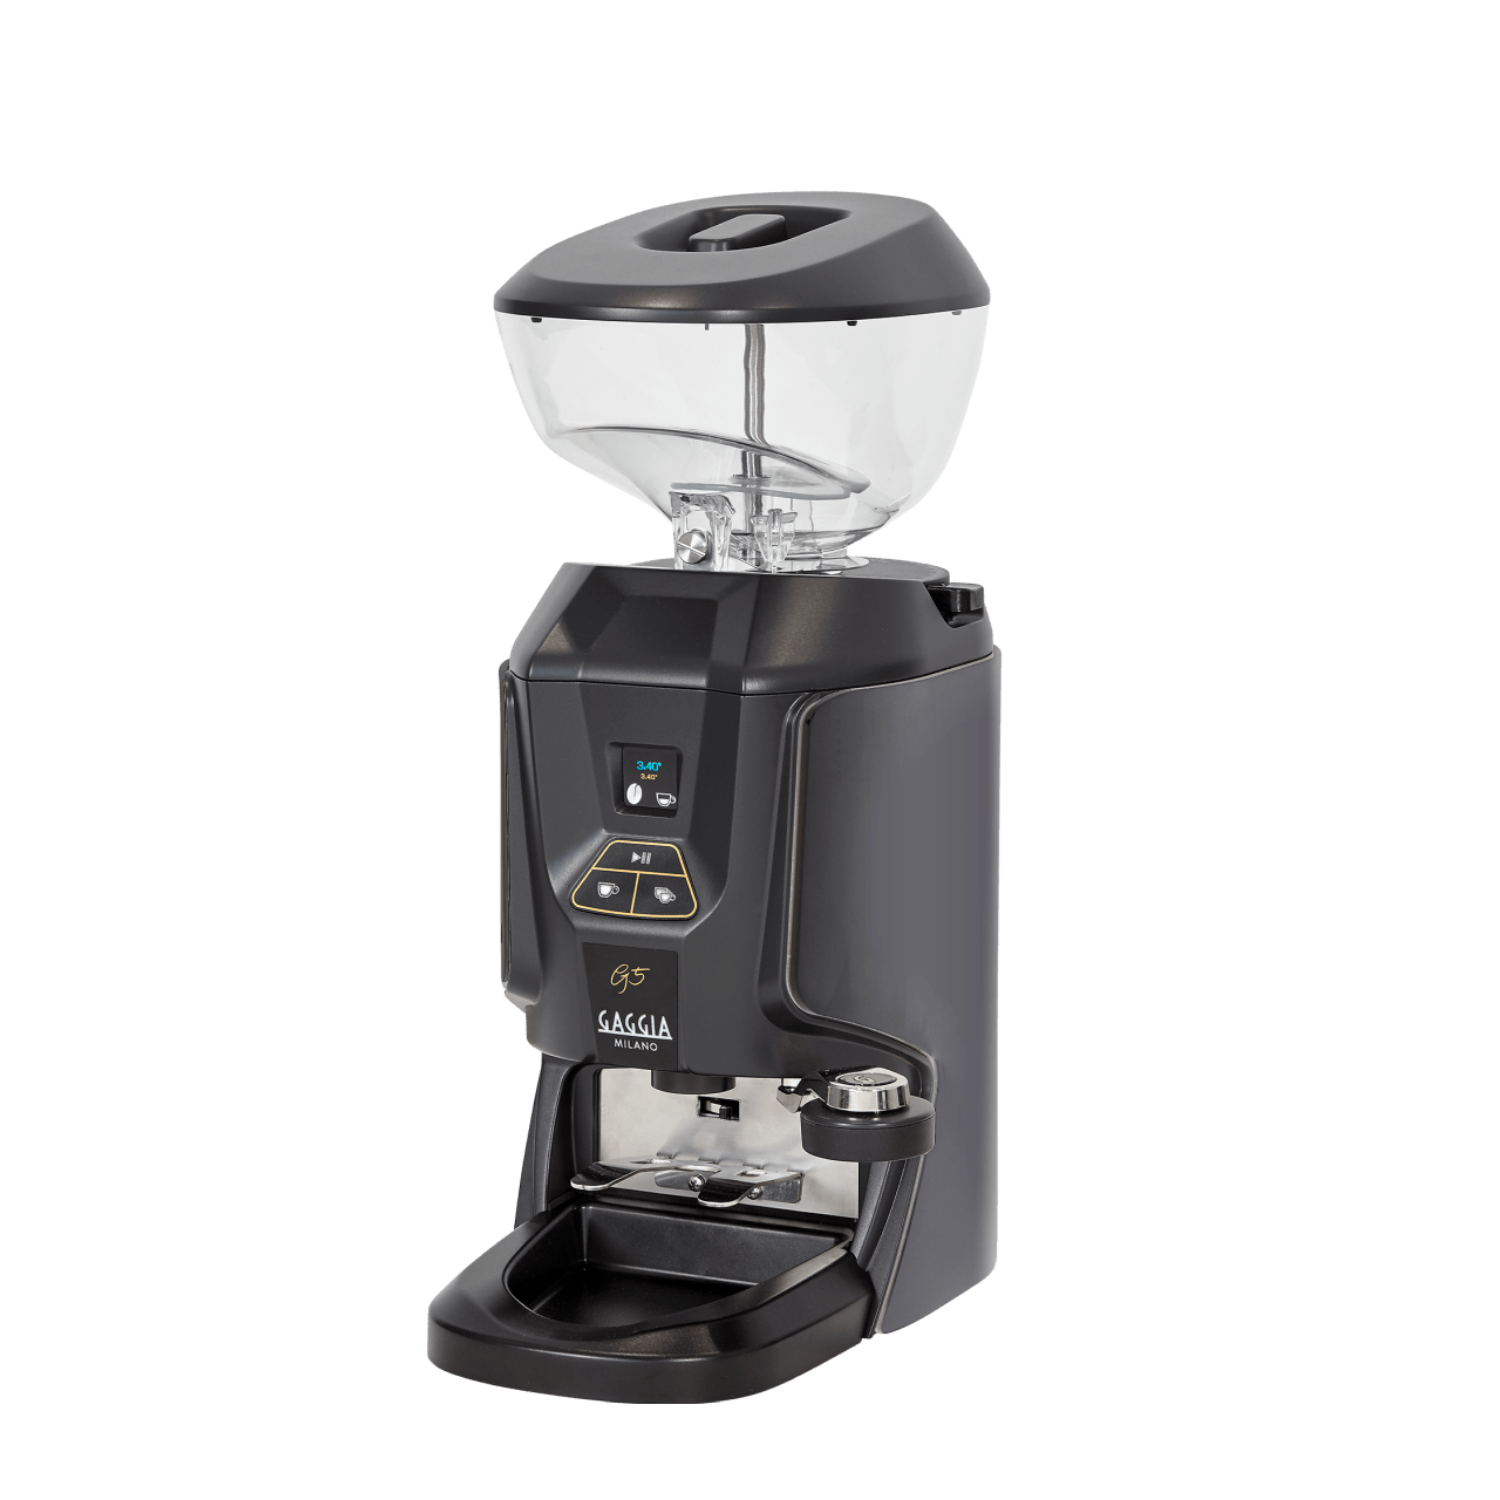 Cafetera Profesional Automática RUBY PRO